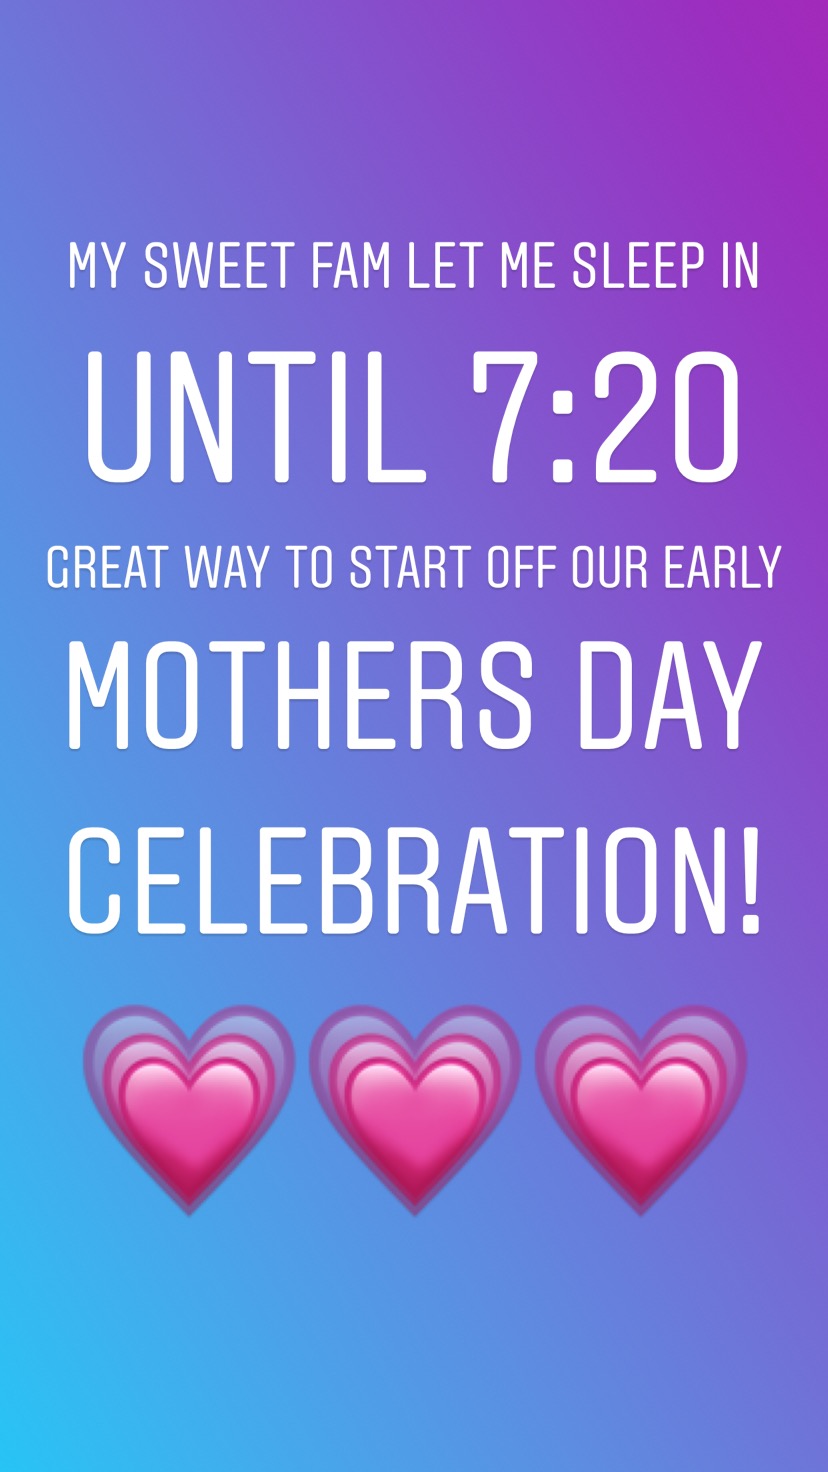 Mother’s Day 2018